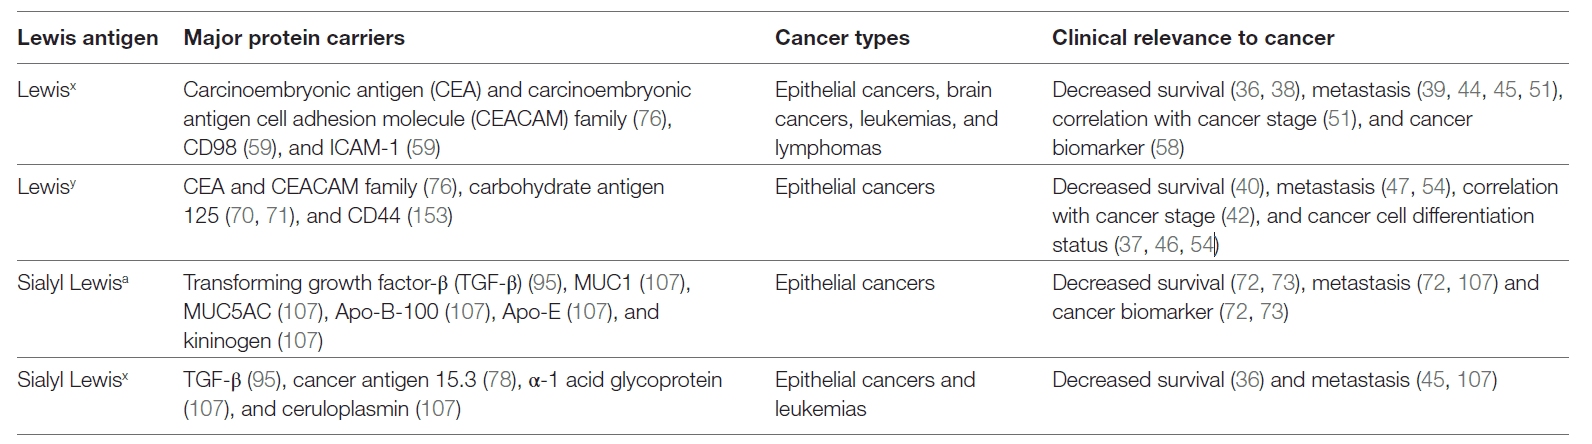 Clinical relevance of Lewis antigen overexpression in different types of cancers. 